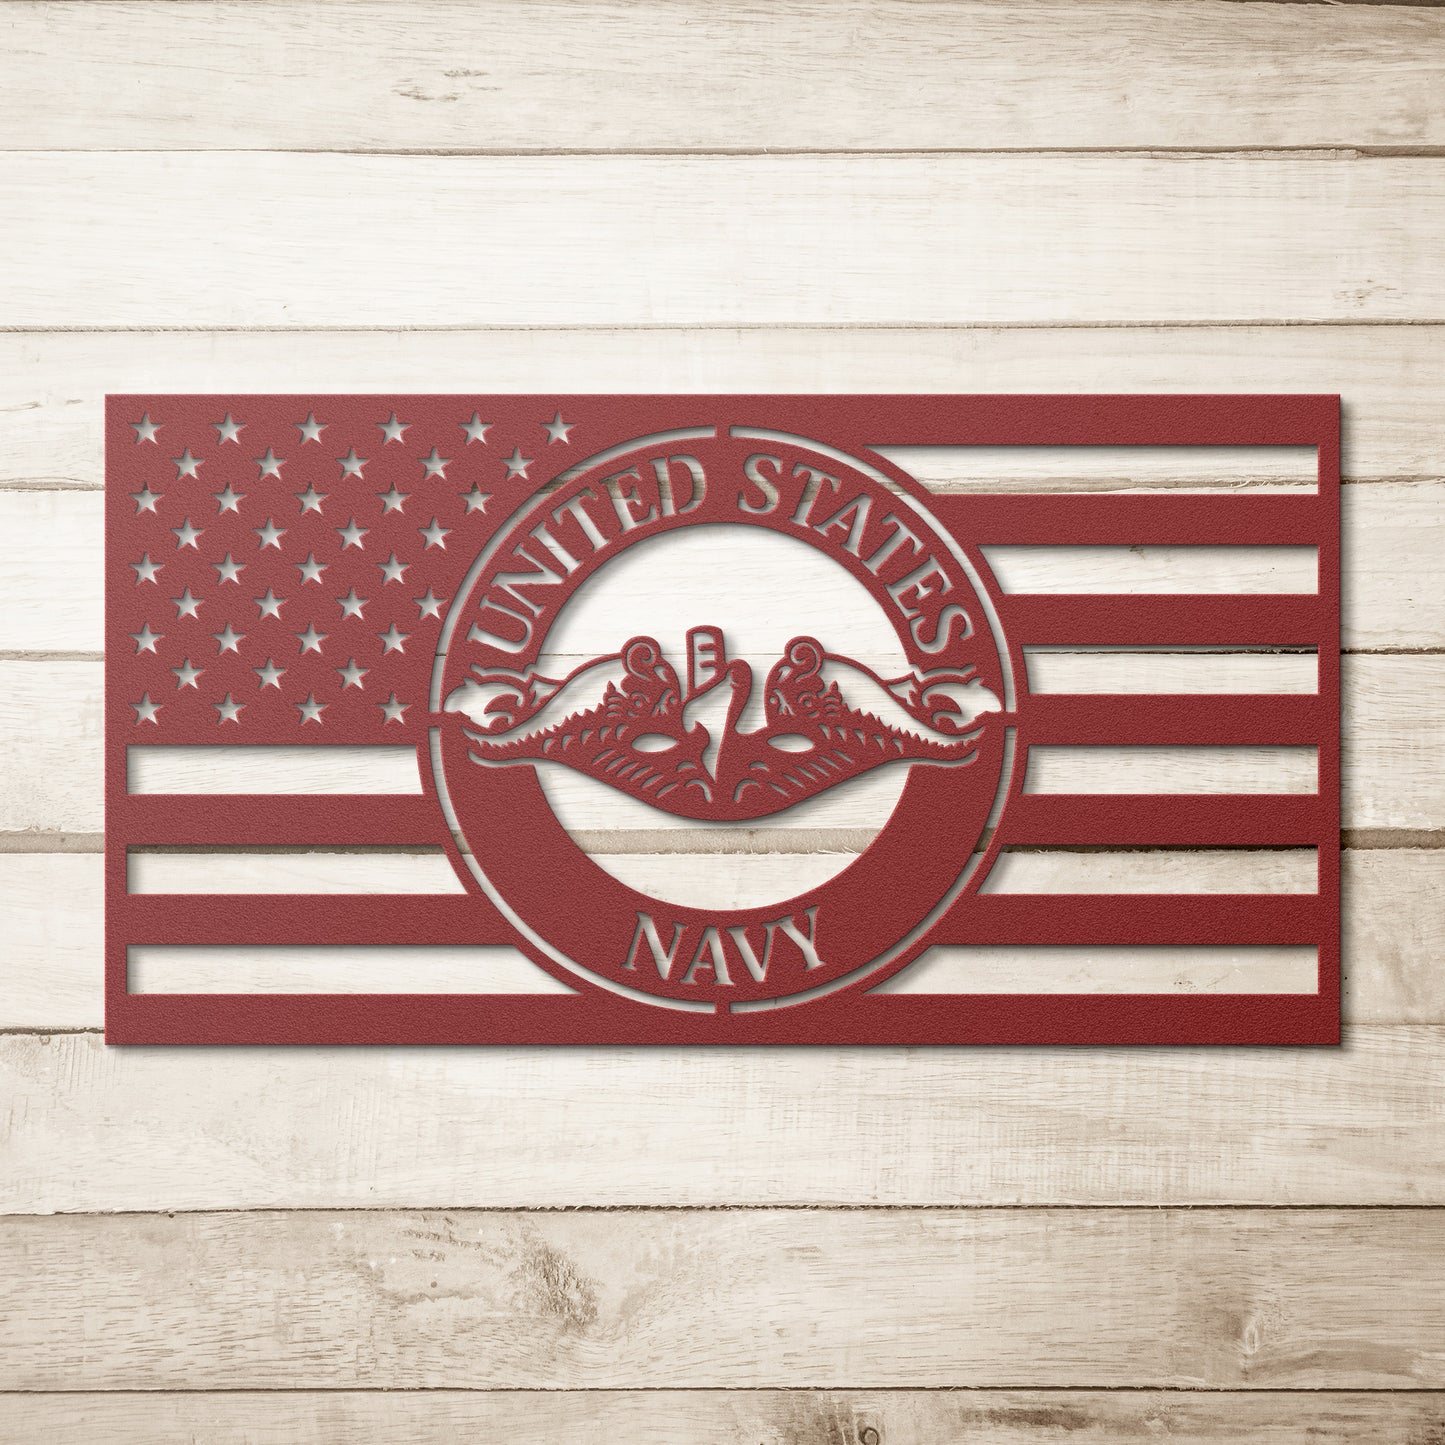 United States Navy Themed American Flag - Made in USA - Military Decor